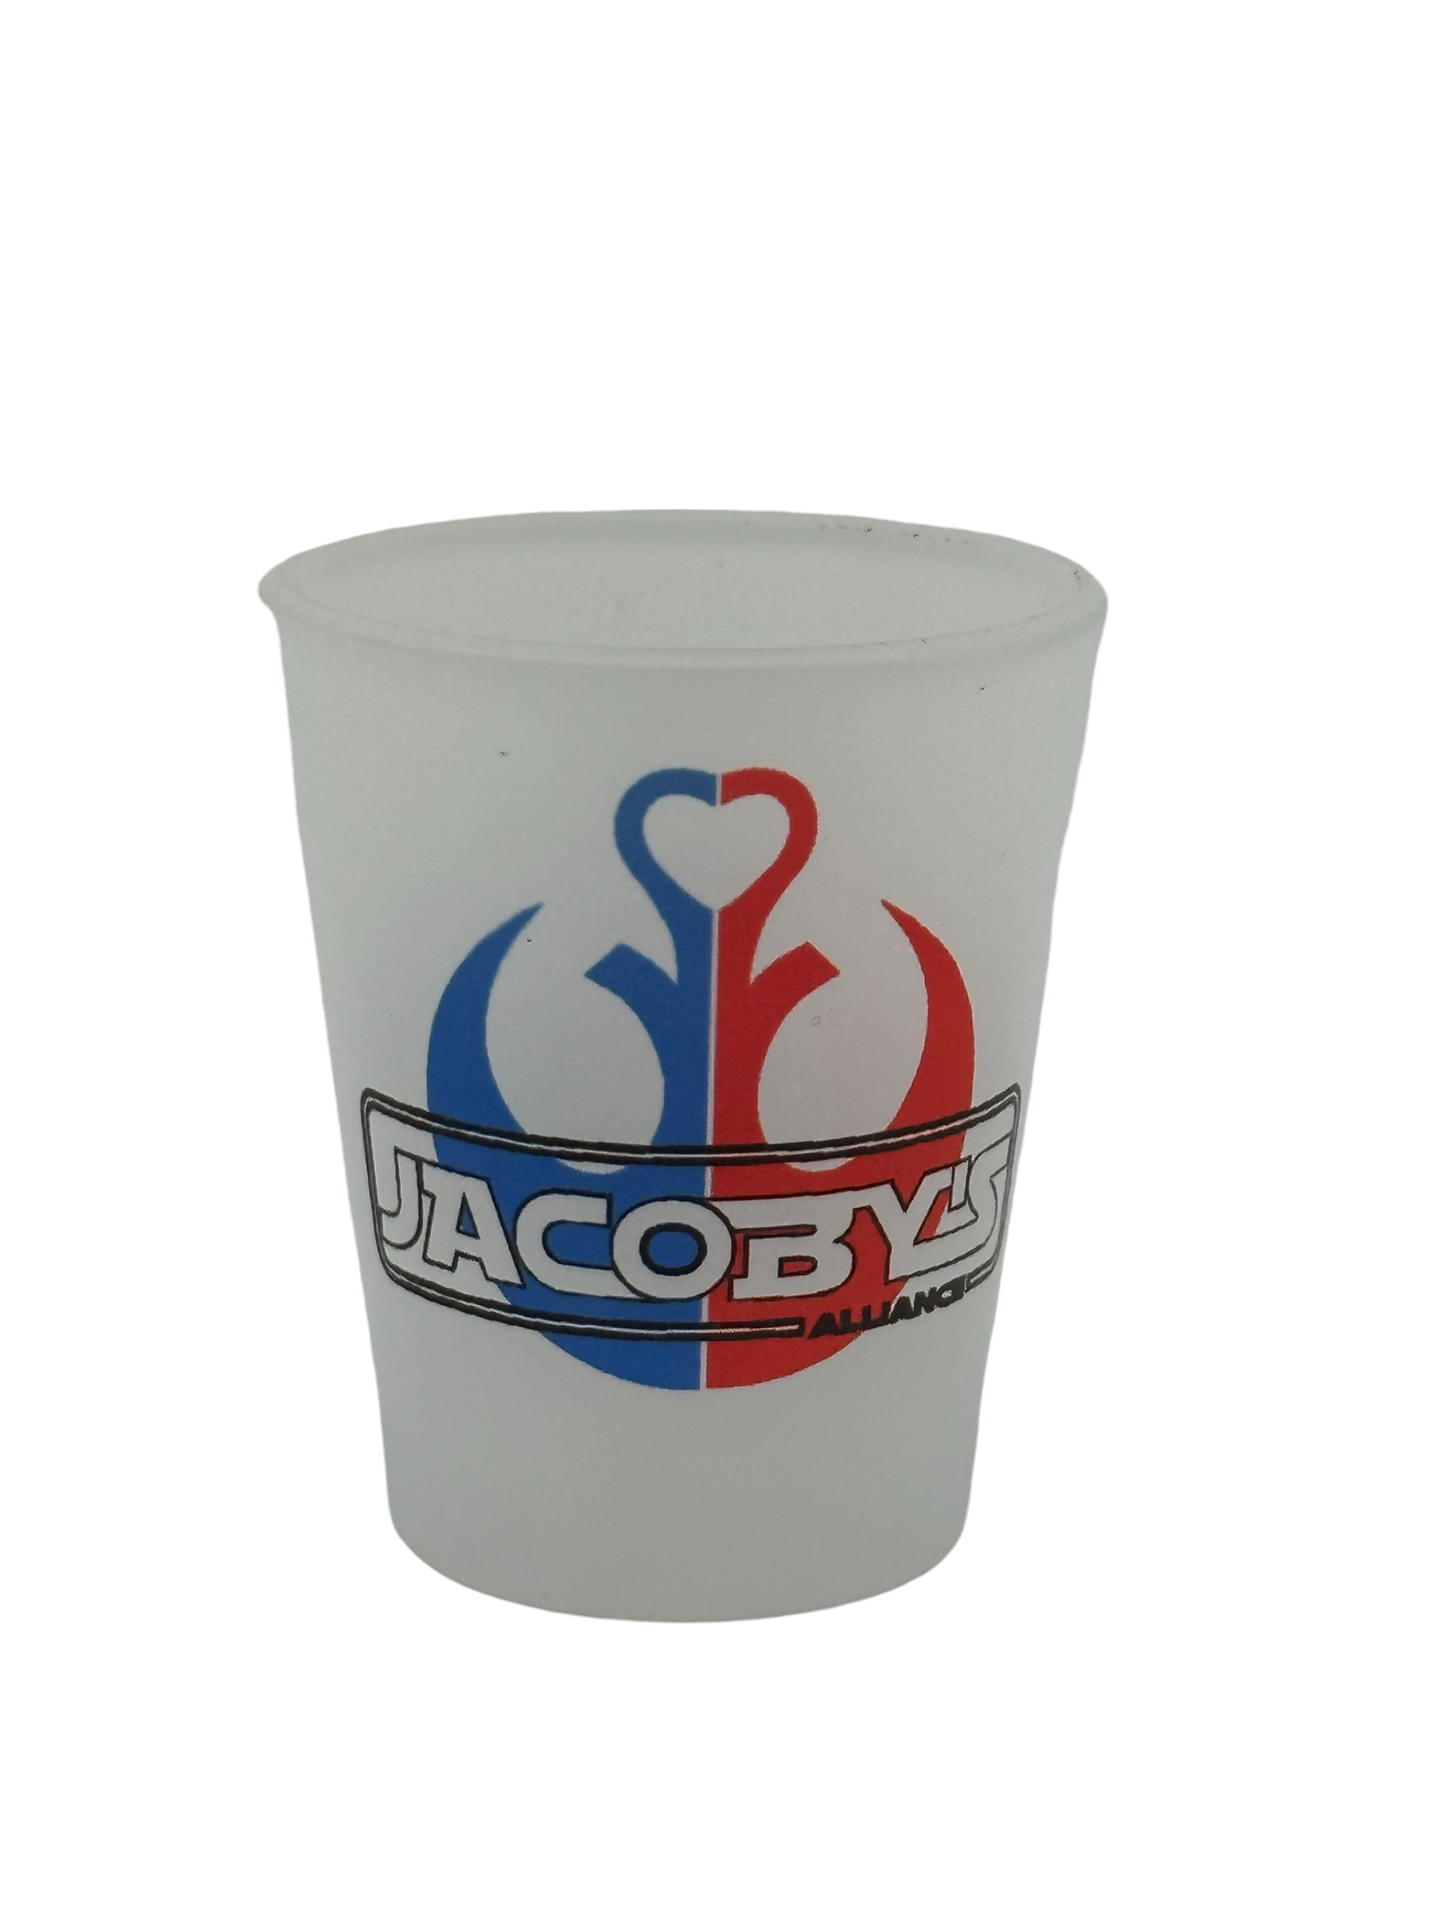 Jacoby's Alliance Shot Glass